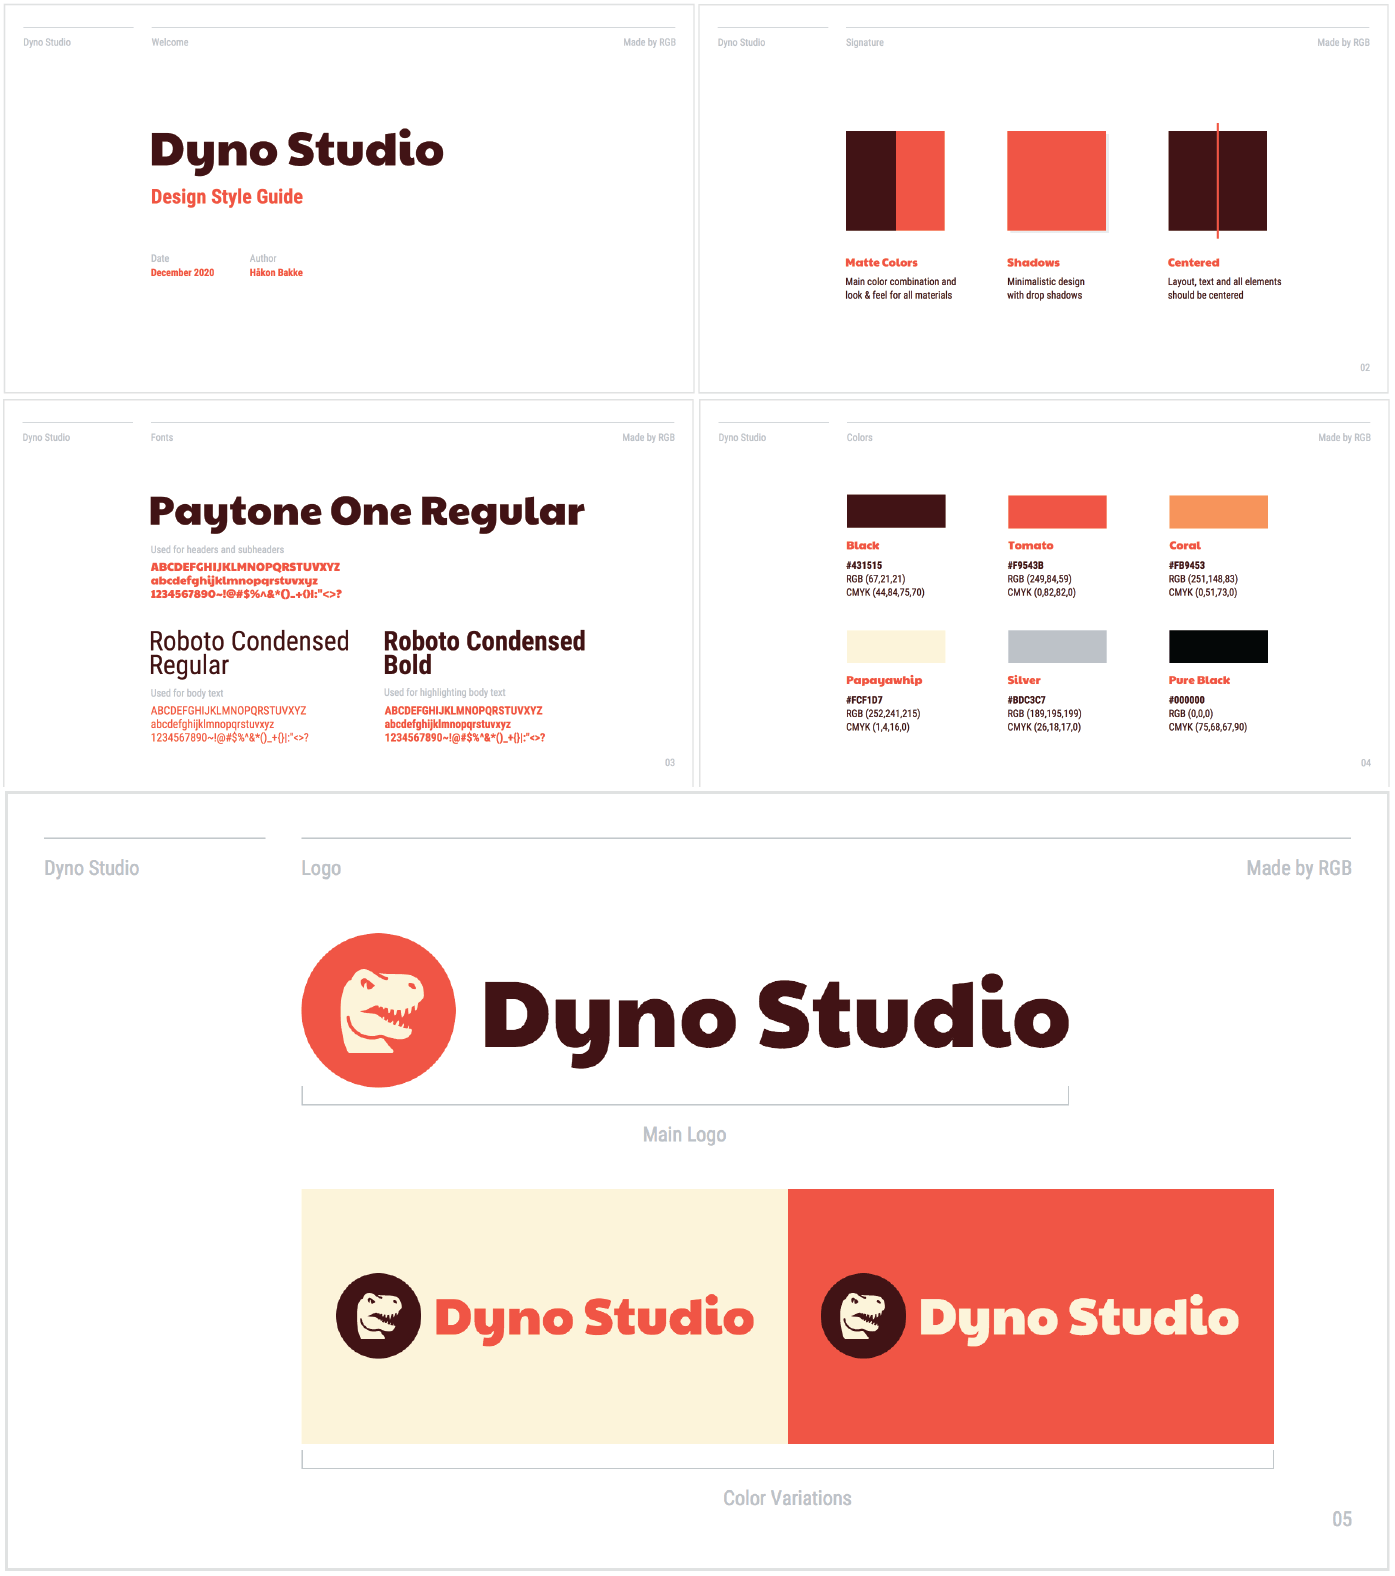 Dyno Studio's brand style guidelines